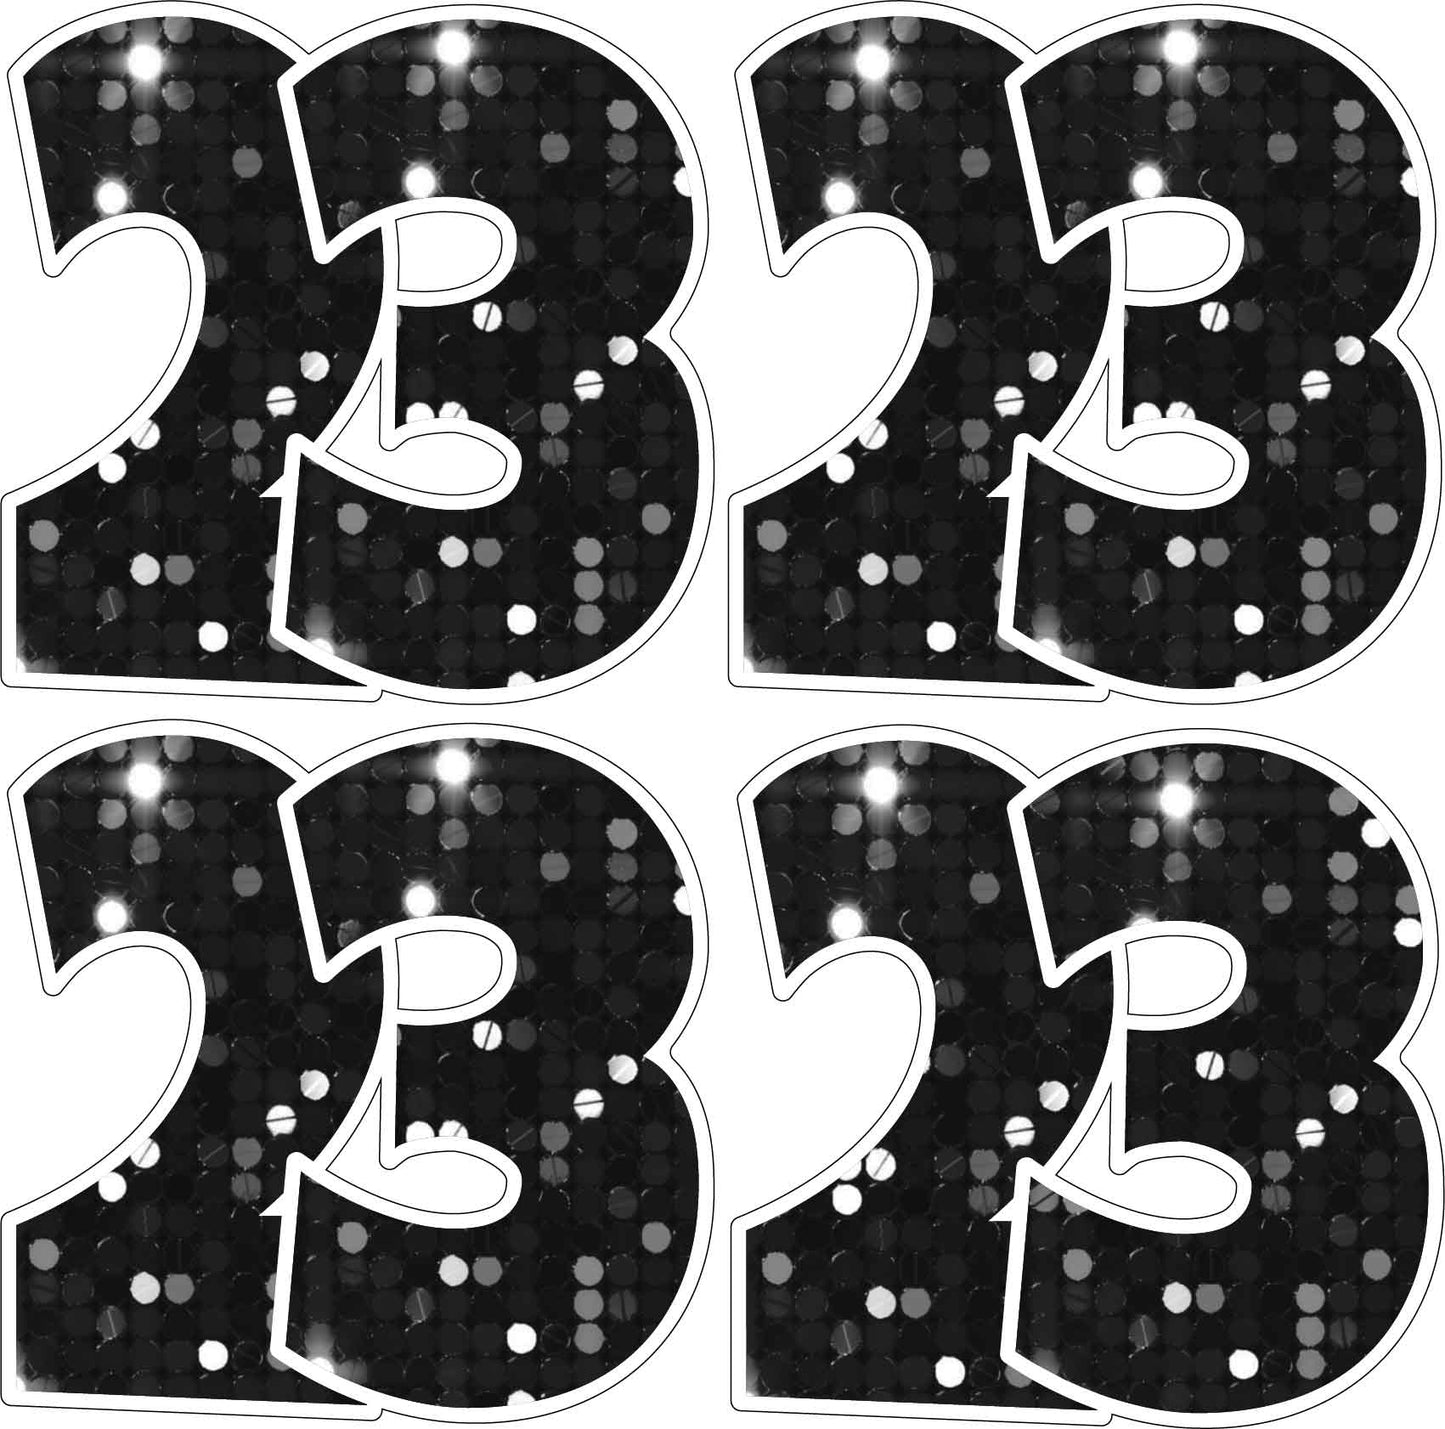 23 23 2323 Graduation Numbers Half Sheet Misc. (Must Purchase 2 Half sheets - You Can Mix & Match)